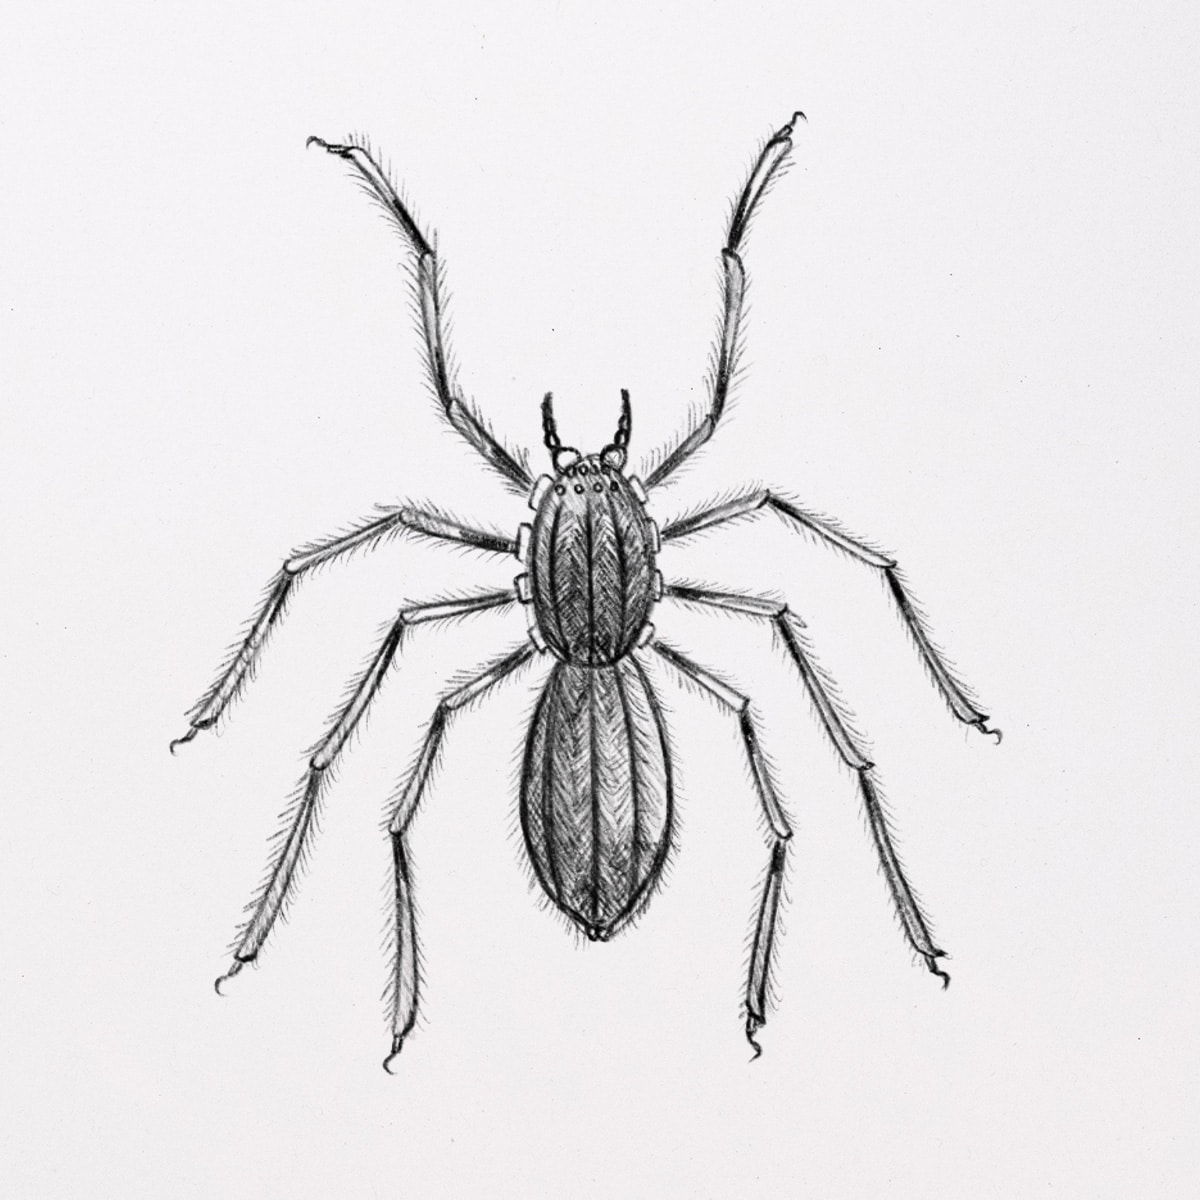 Spider Drawing - How To Draw A Spider Step By Step